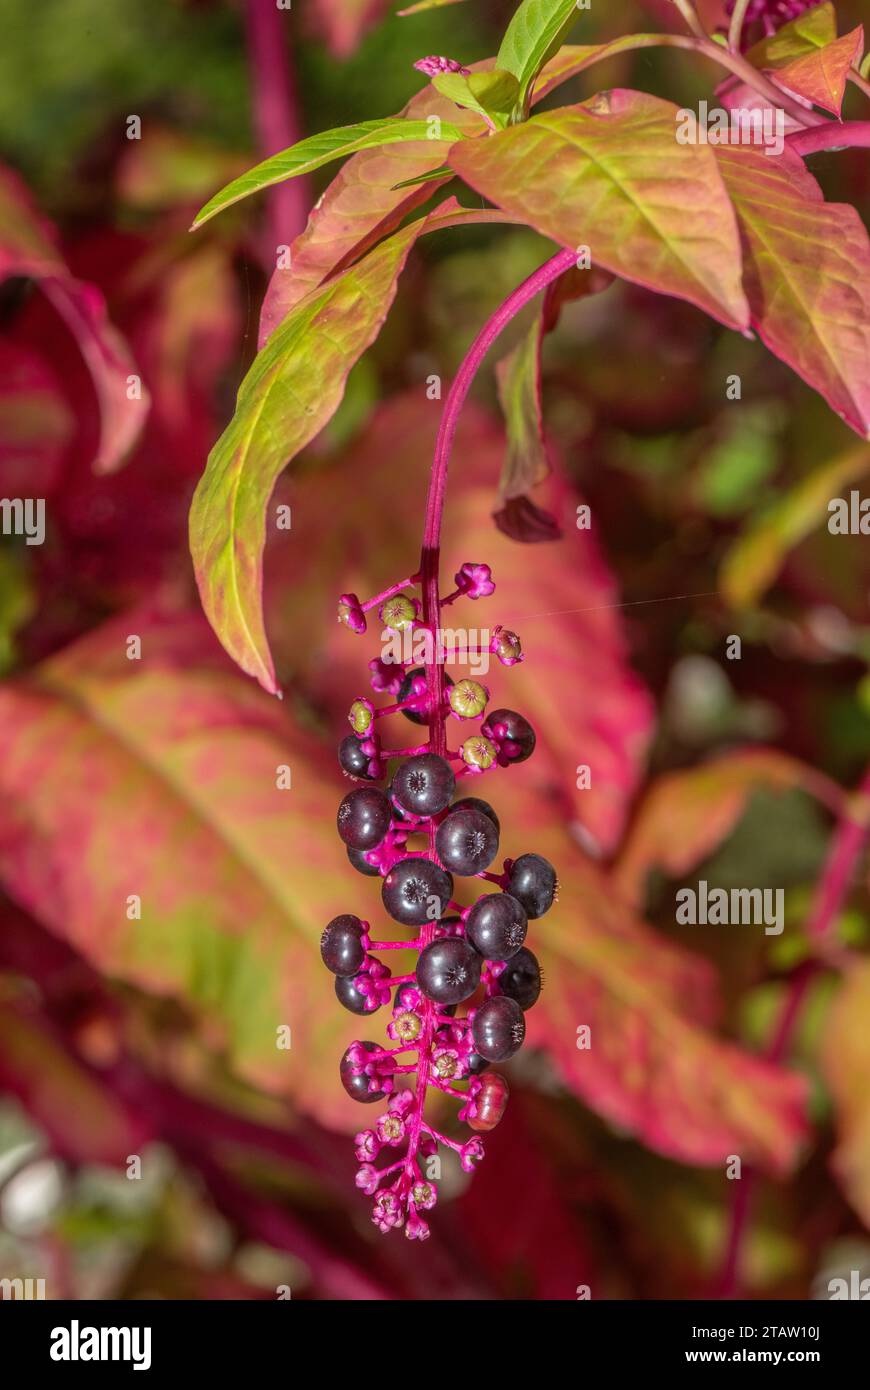 American pokeweed, Phytolacca americana, in fruit, with ripe berries, in autumn. Stock Photo